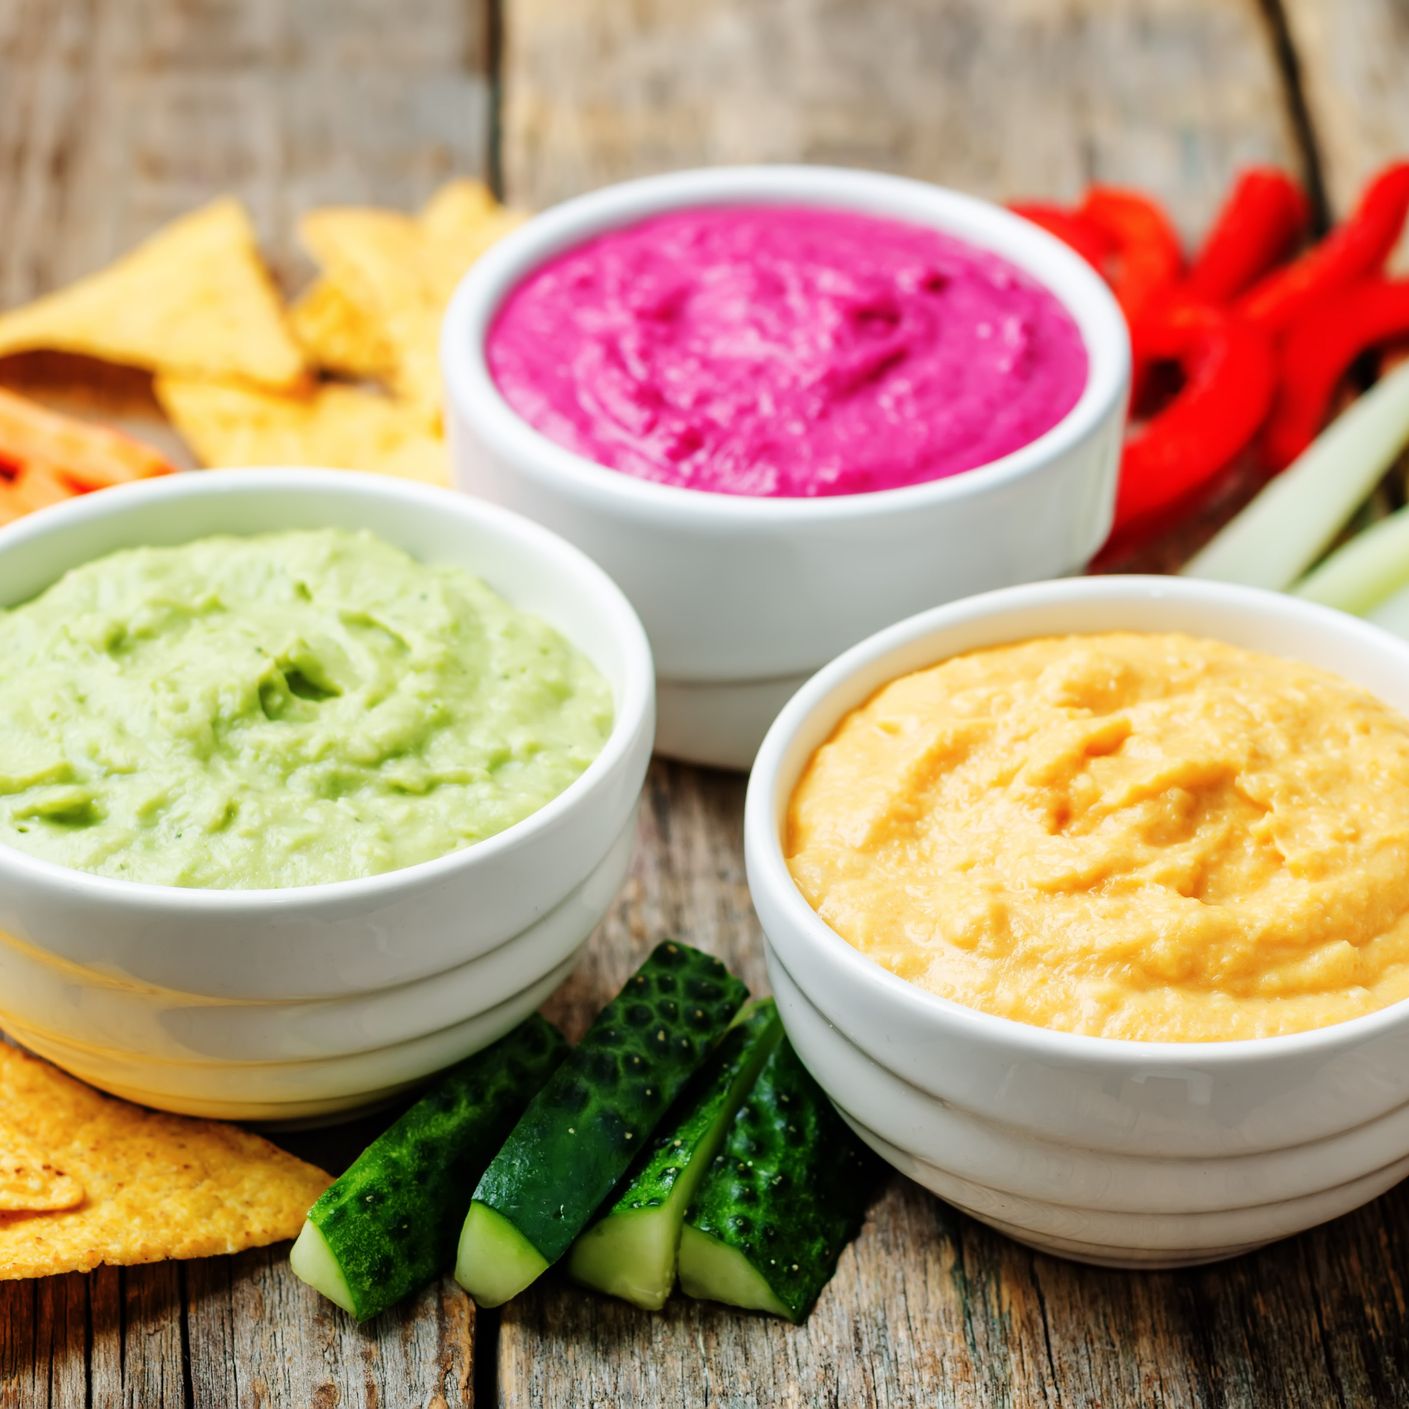 guacamole, hummus, and pink dip surrounded by veggies and tortilla chips